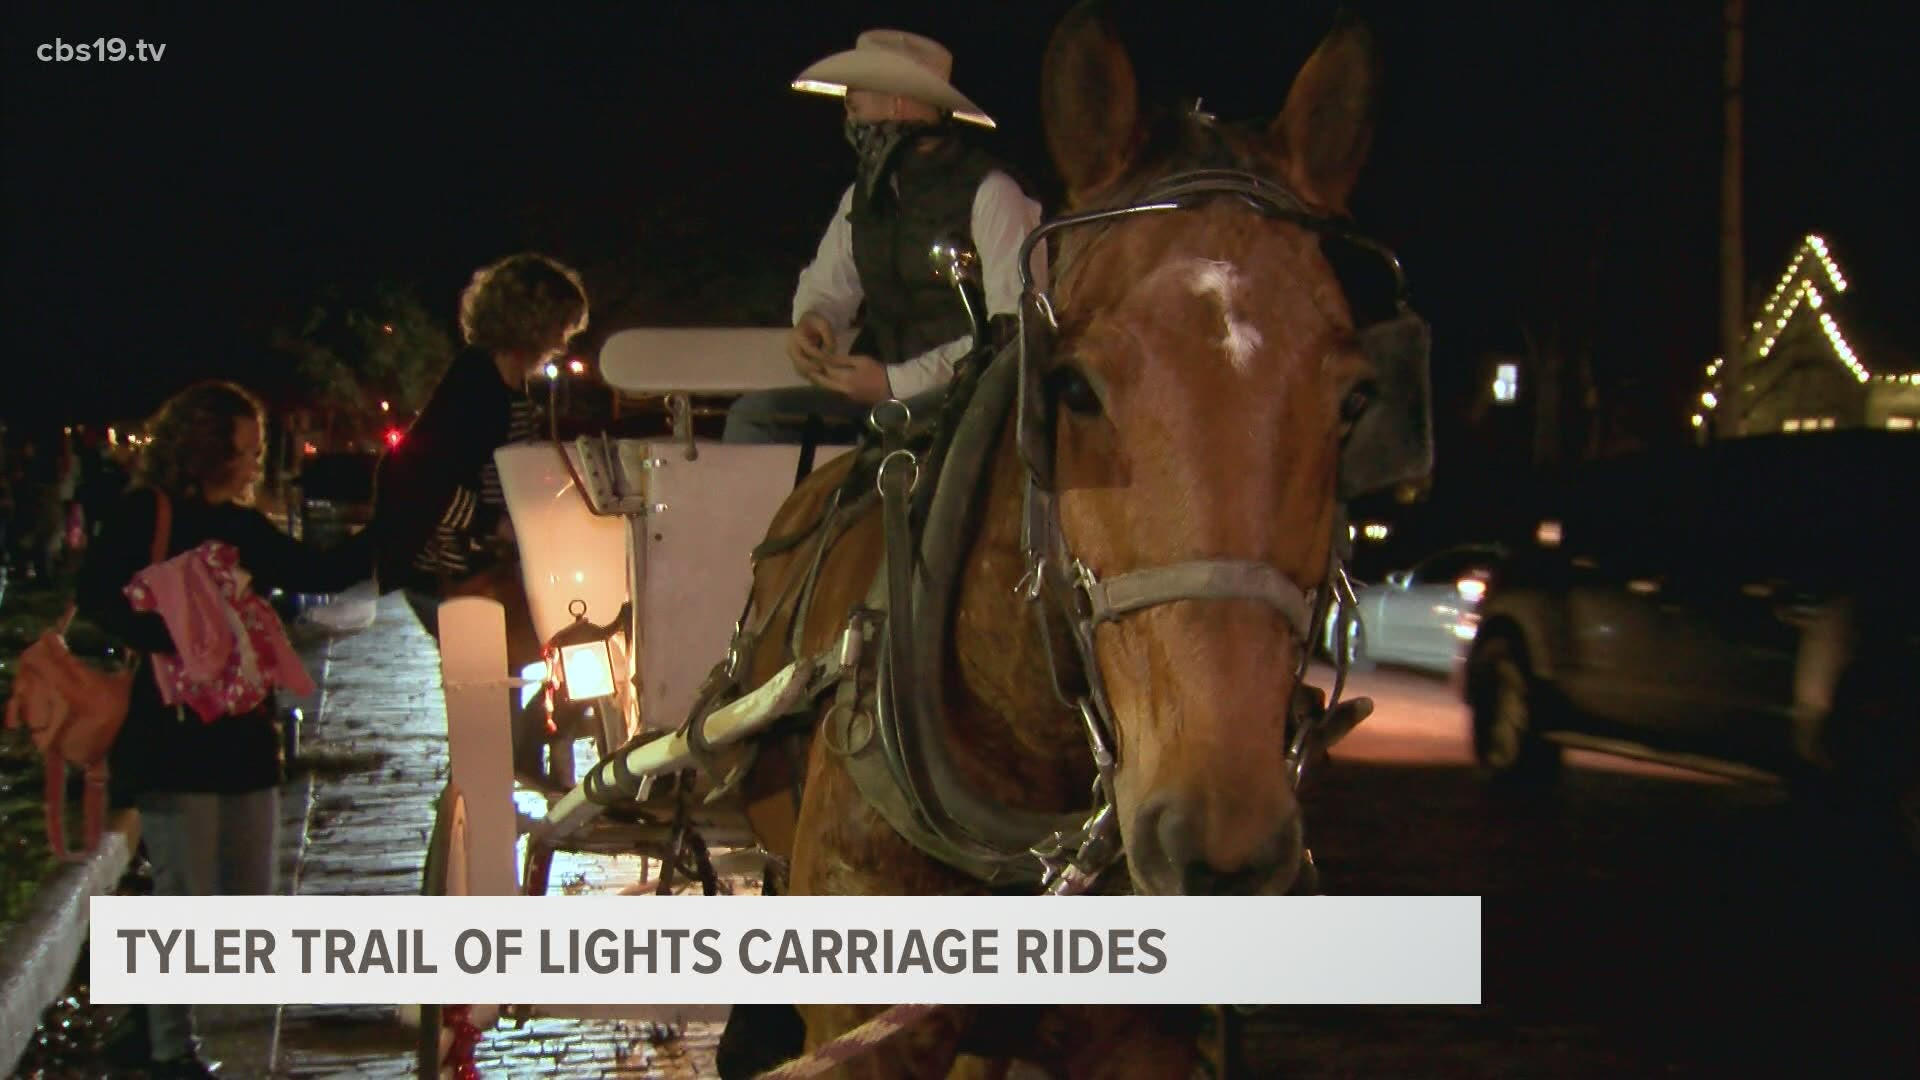 This holiday season, the Hot Springs Carriage Company is offering rides through Tyler's Azalea District Trail of Lights.